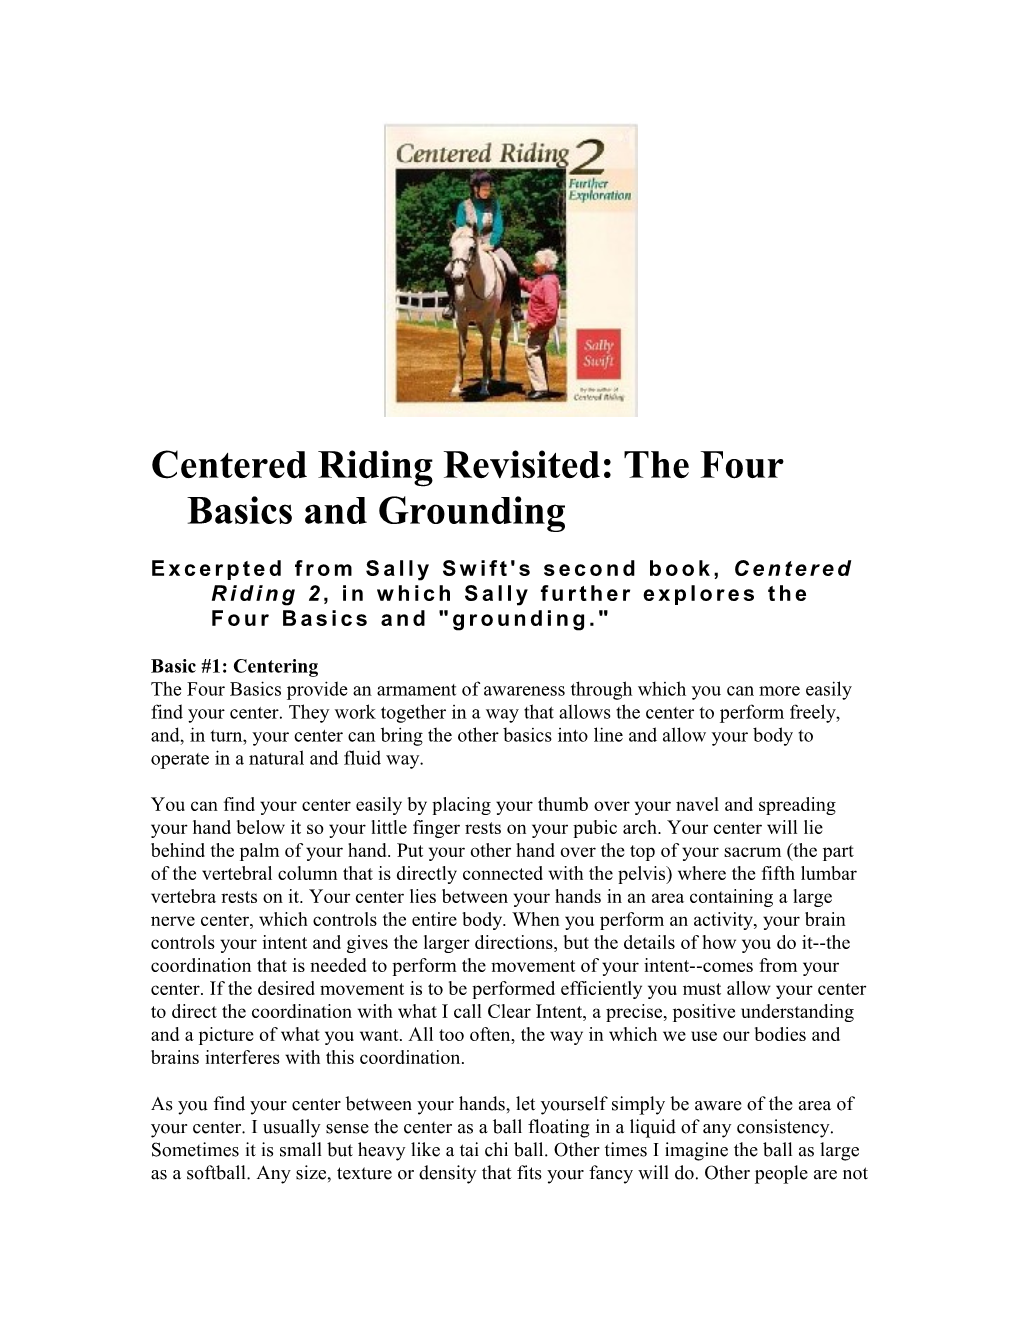 Centered Riding Revisited: the Four Basics and Grounding